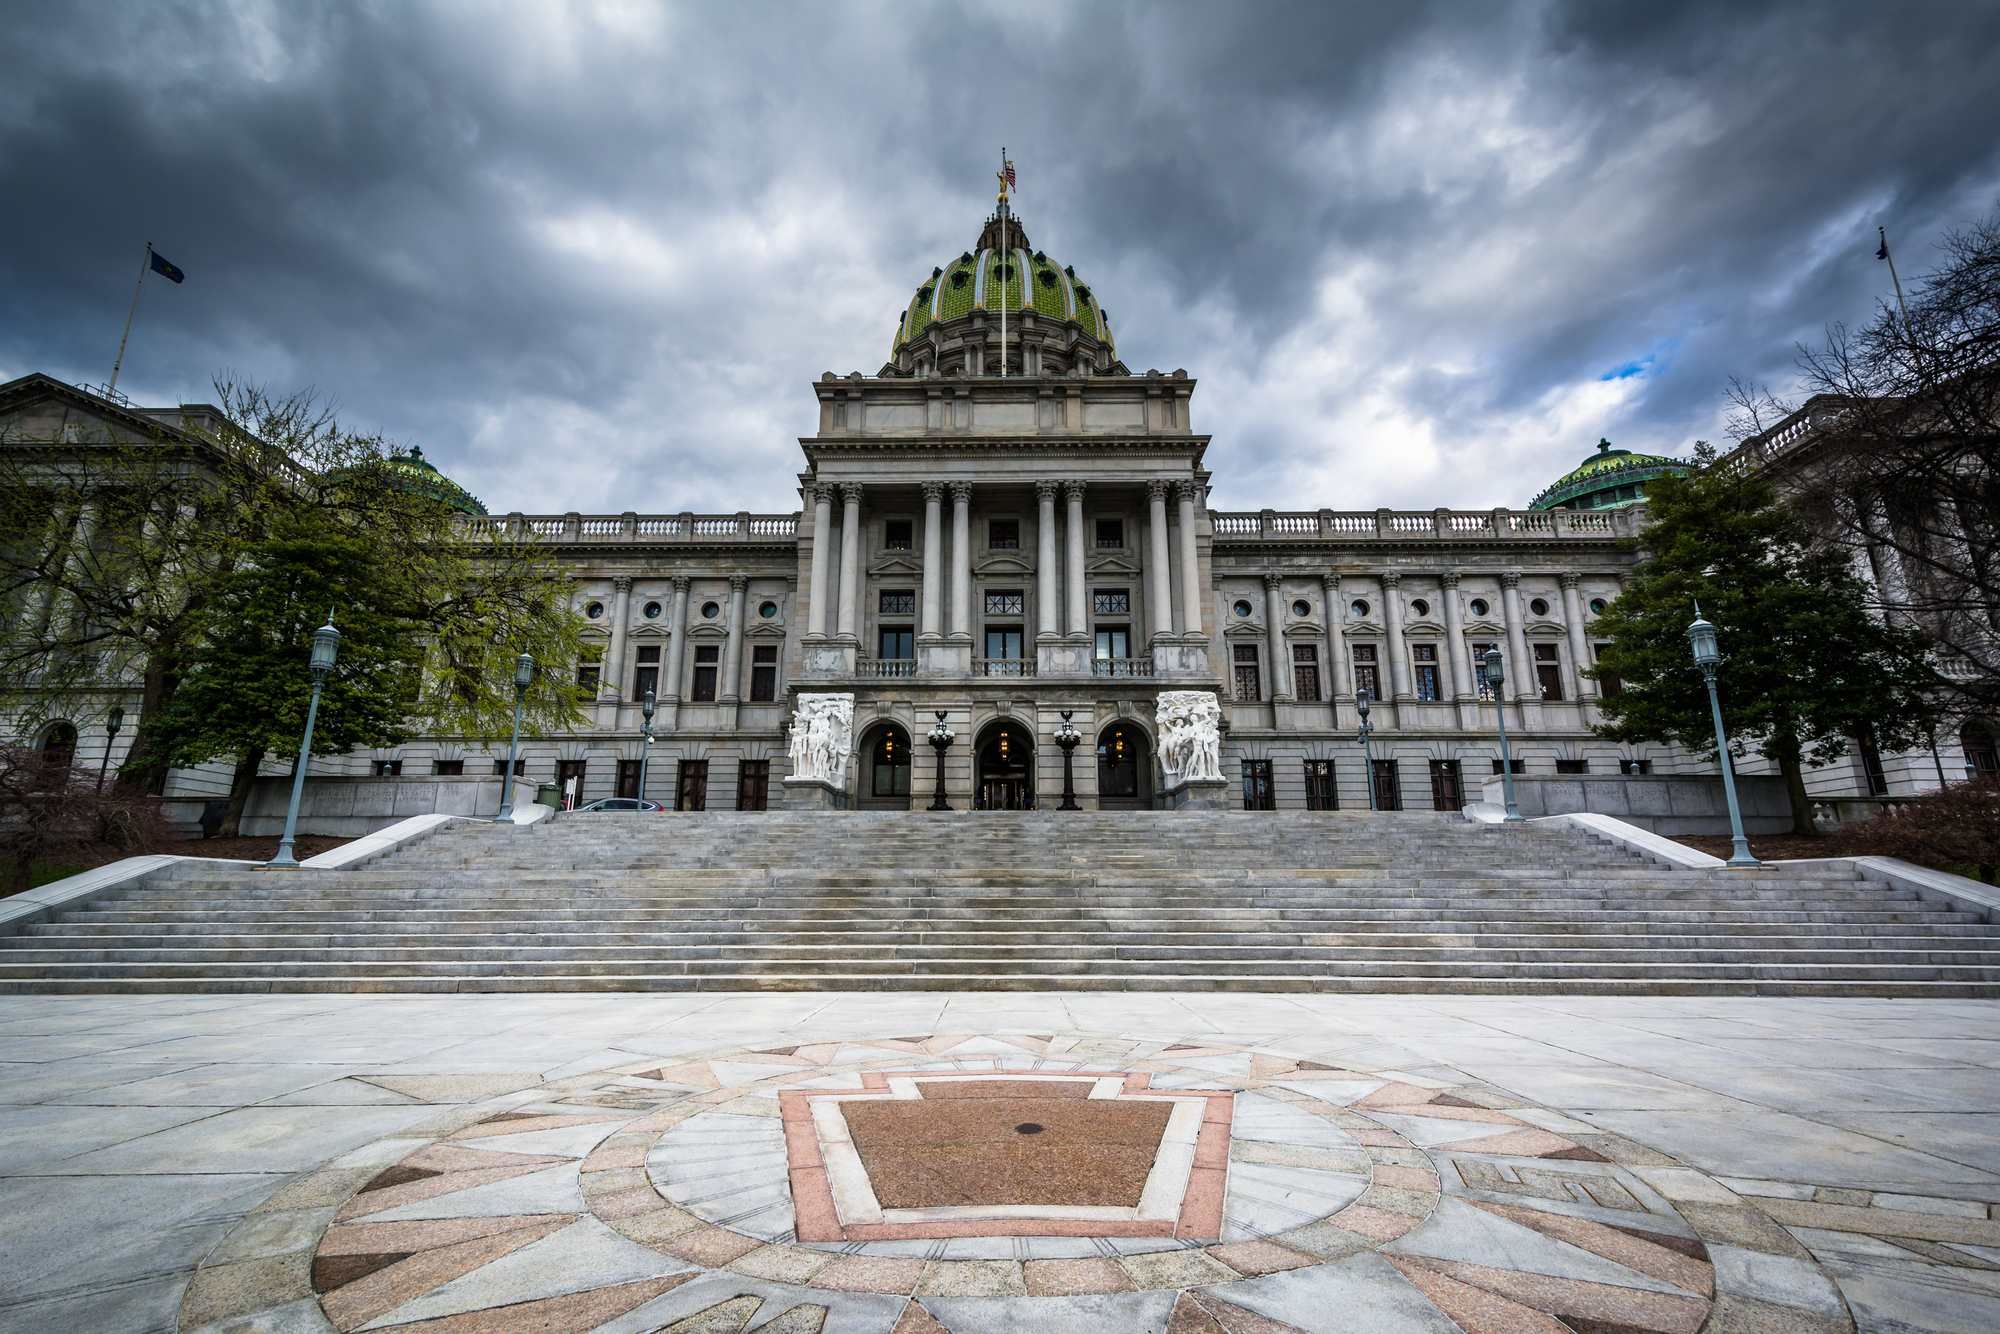 PA Lawmakers Move To Have Clergy Sex Abuse Amendment on Ballot